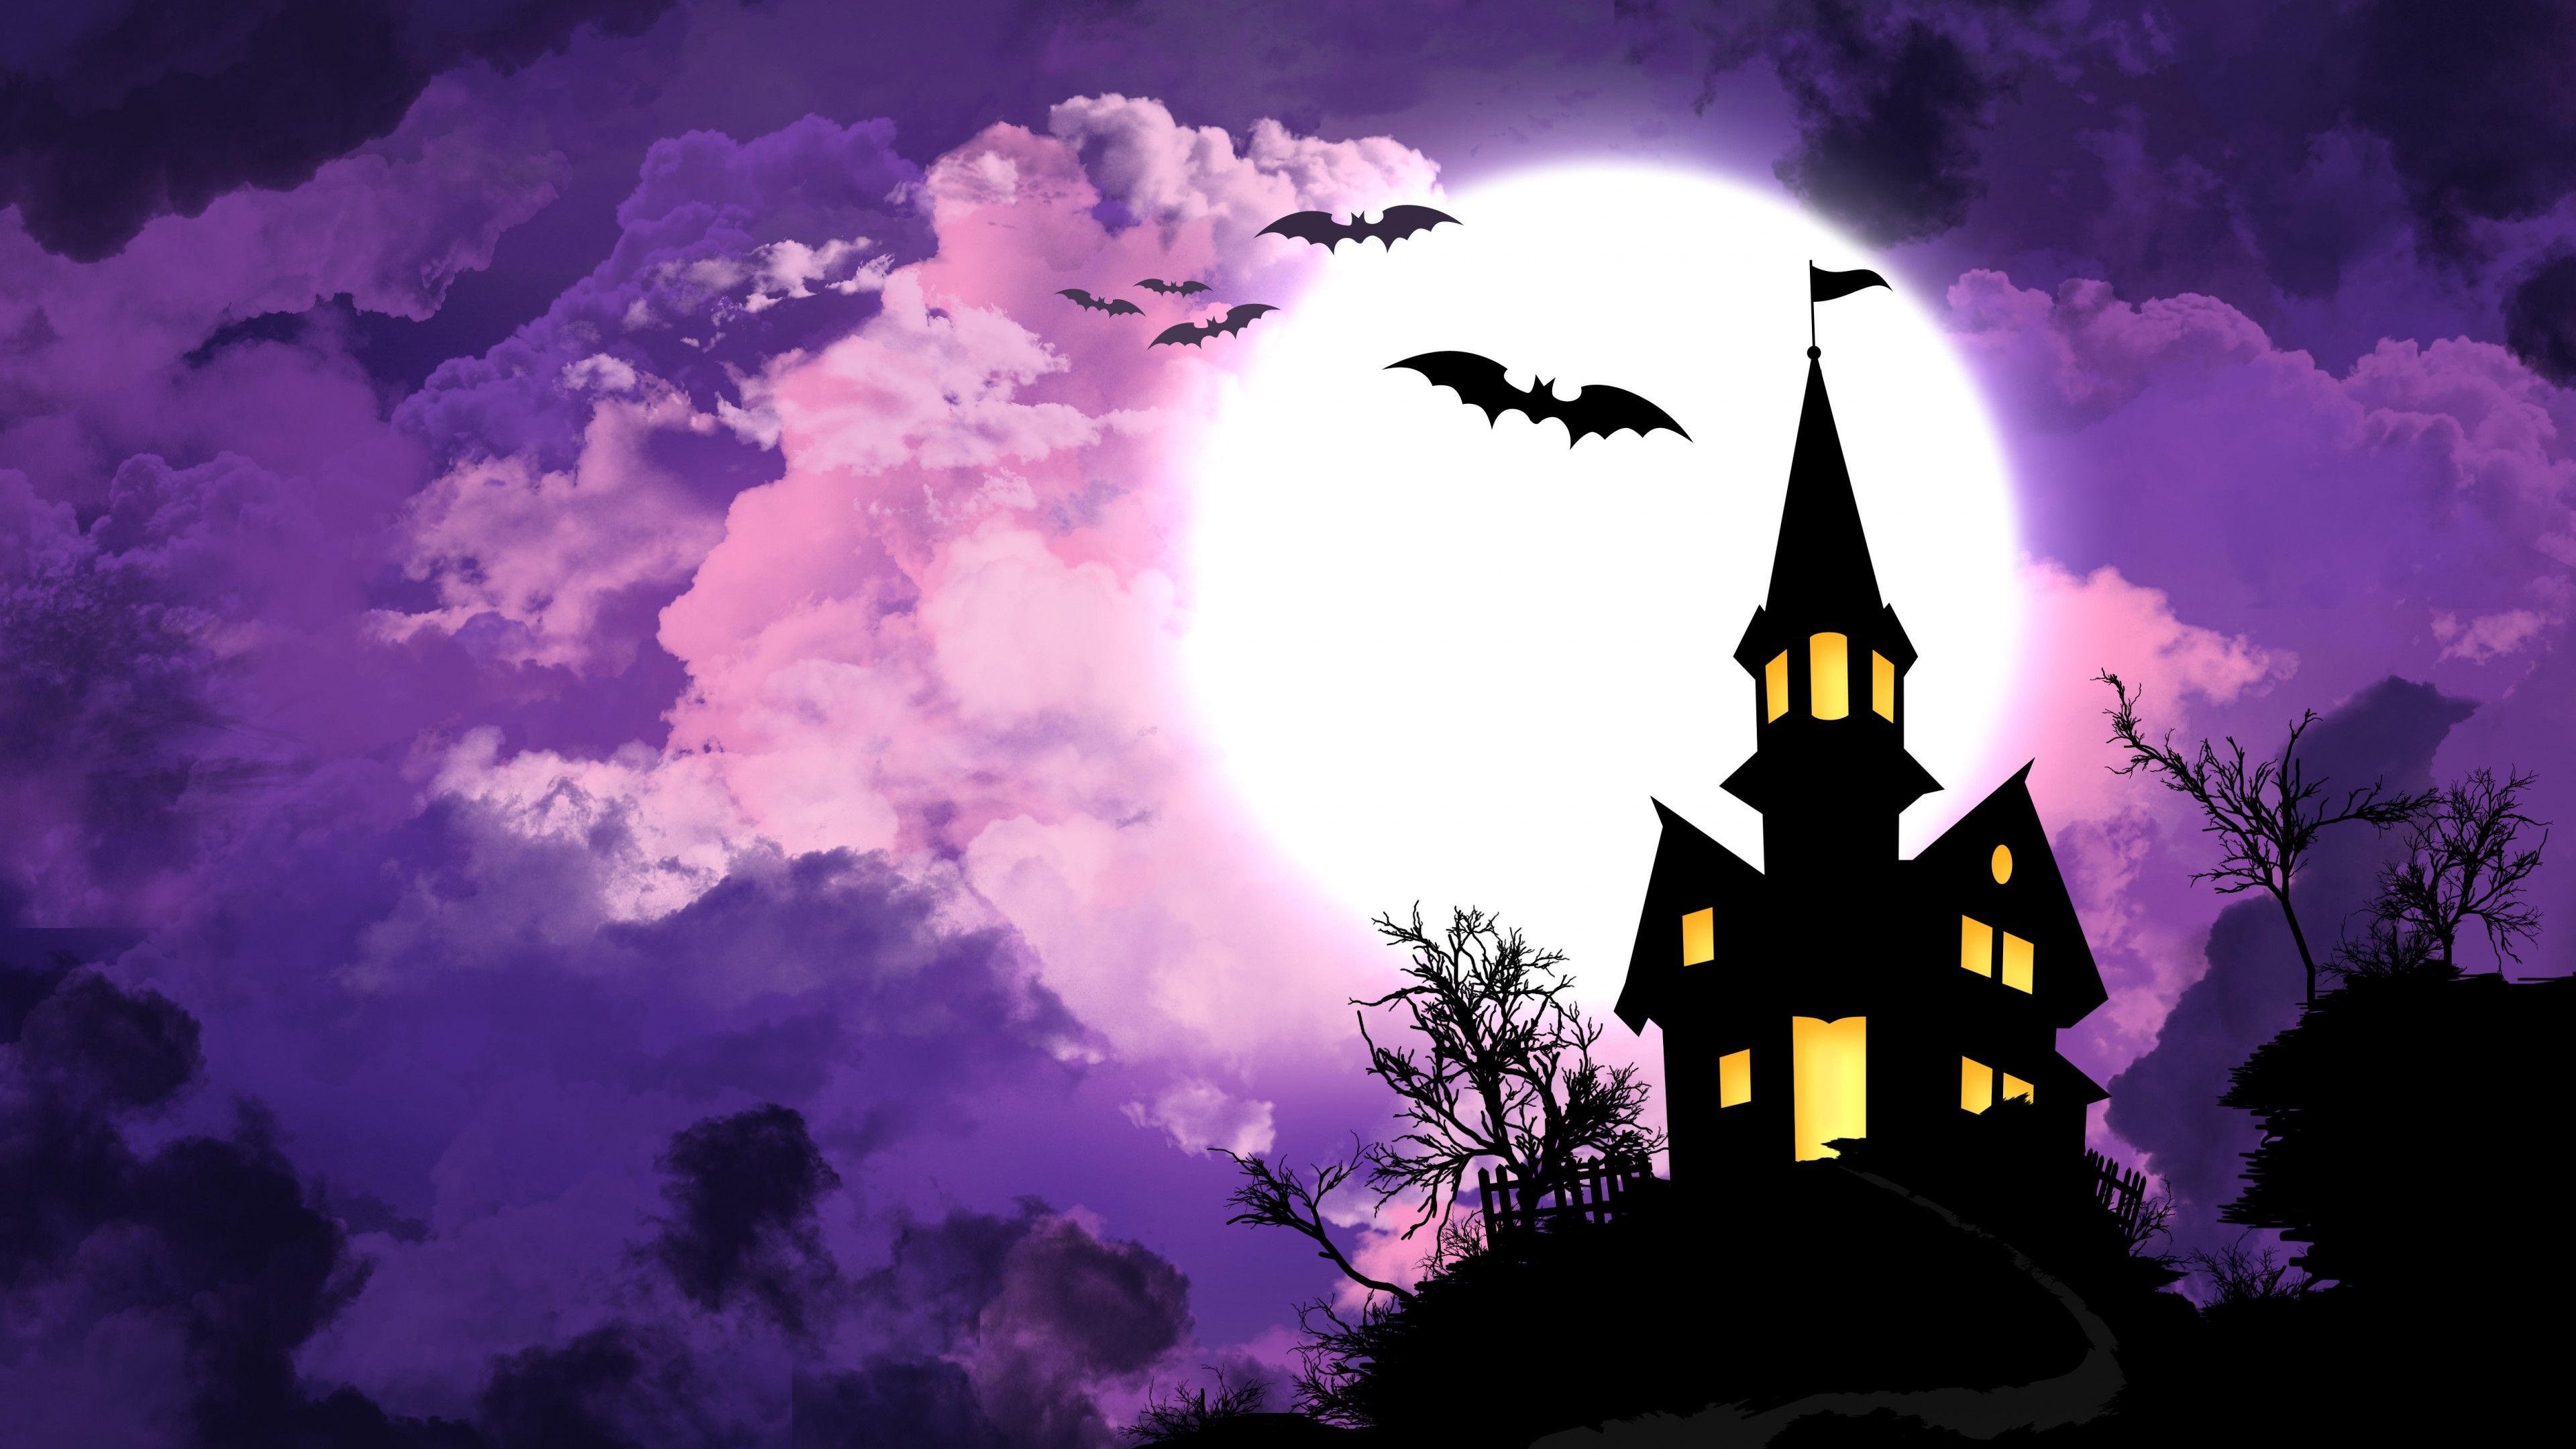 Wallpaper Haunted House, Bats, Moon, HD, 4K, Celebrations / Halloween,. Wallpaper for iPhone, Android, Mobile and Desktop